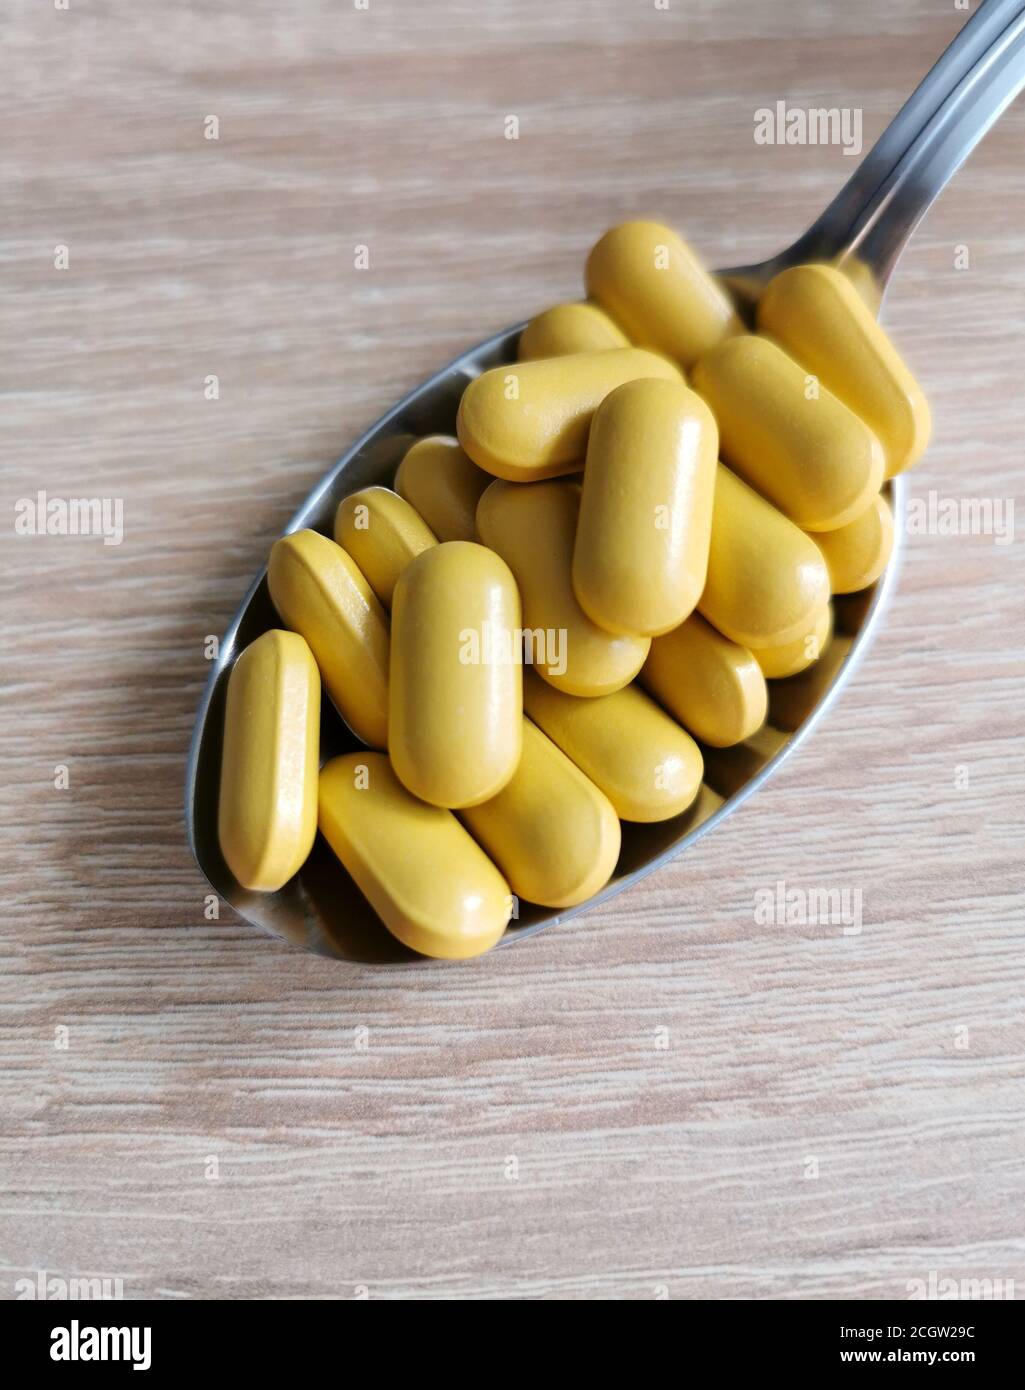 Spoon with pills, dietary supplements on wooden table Stock Photo